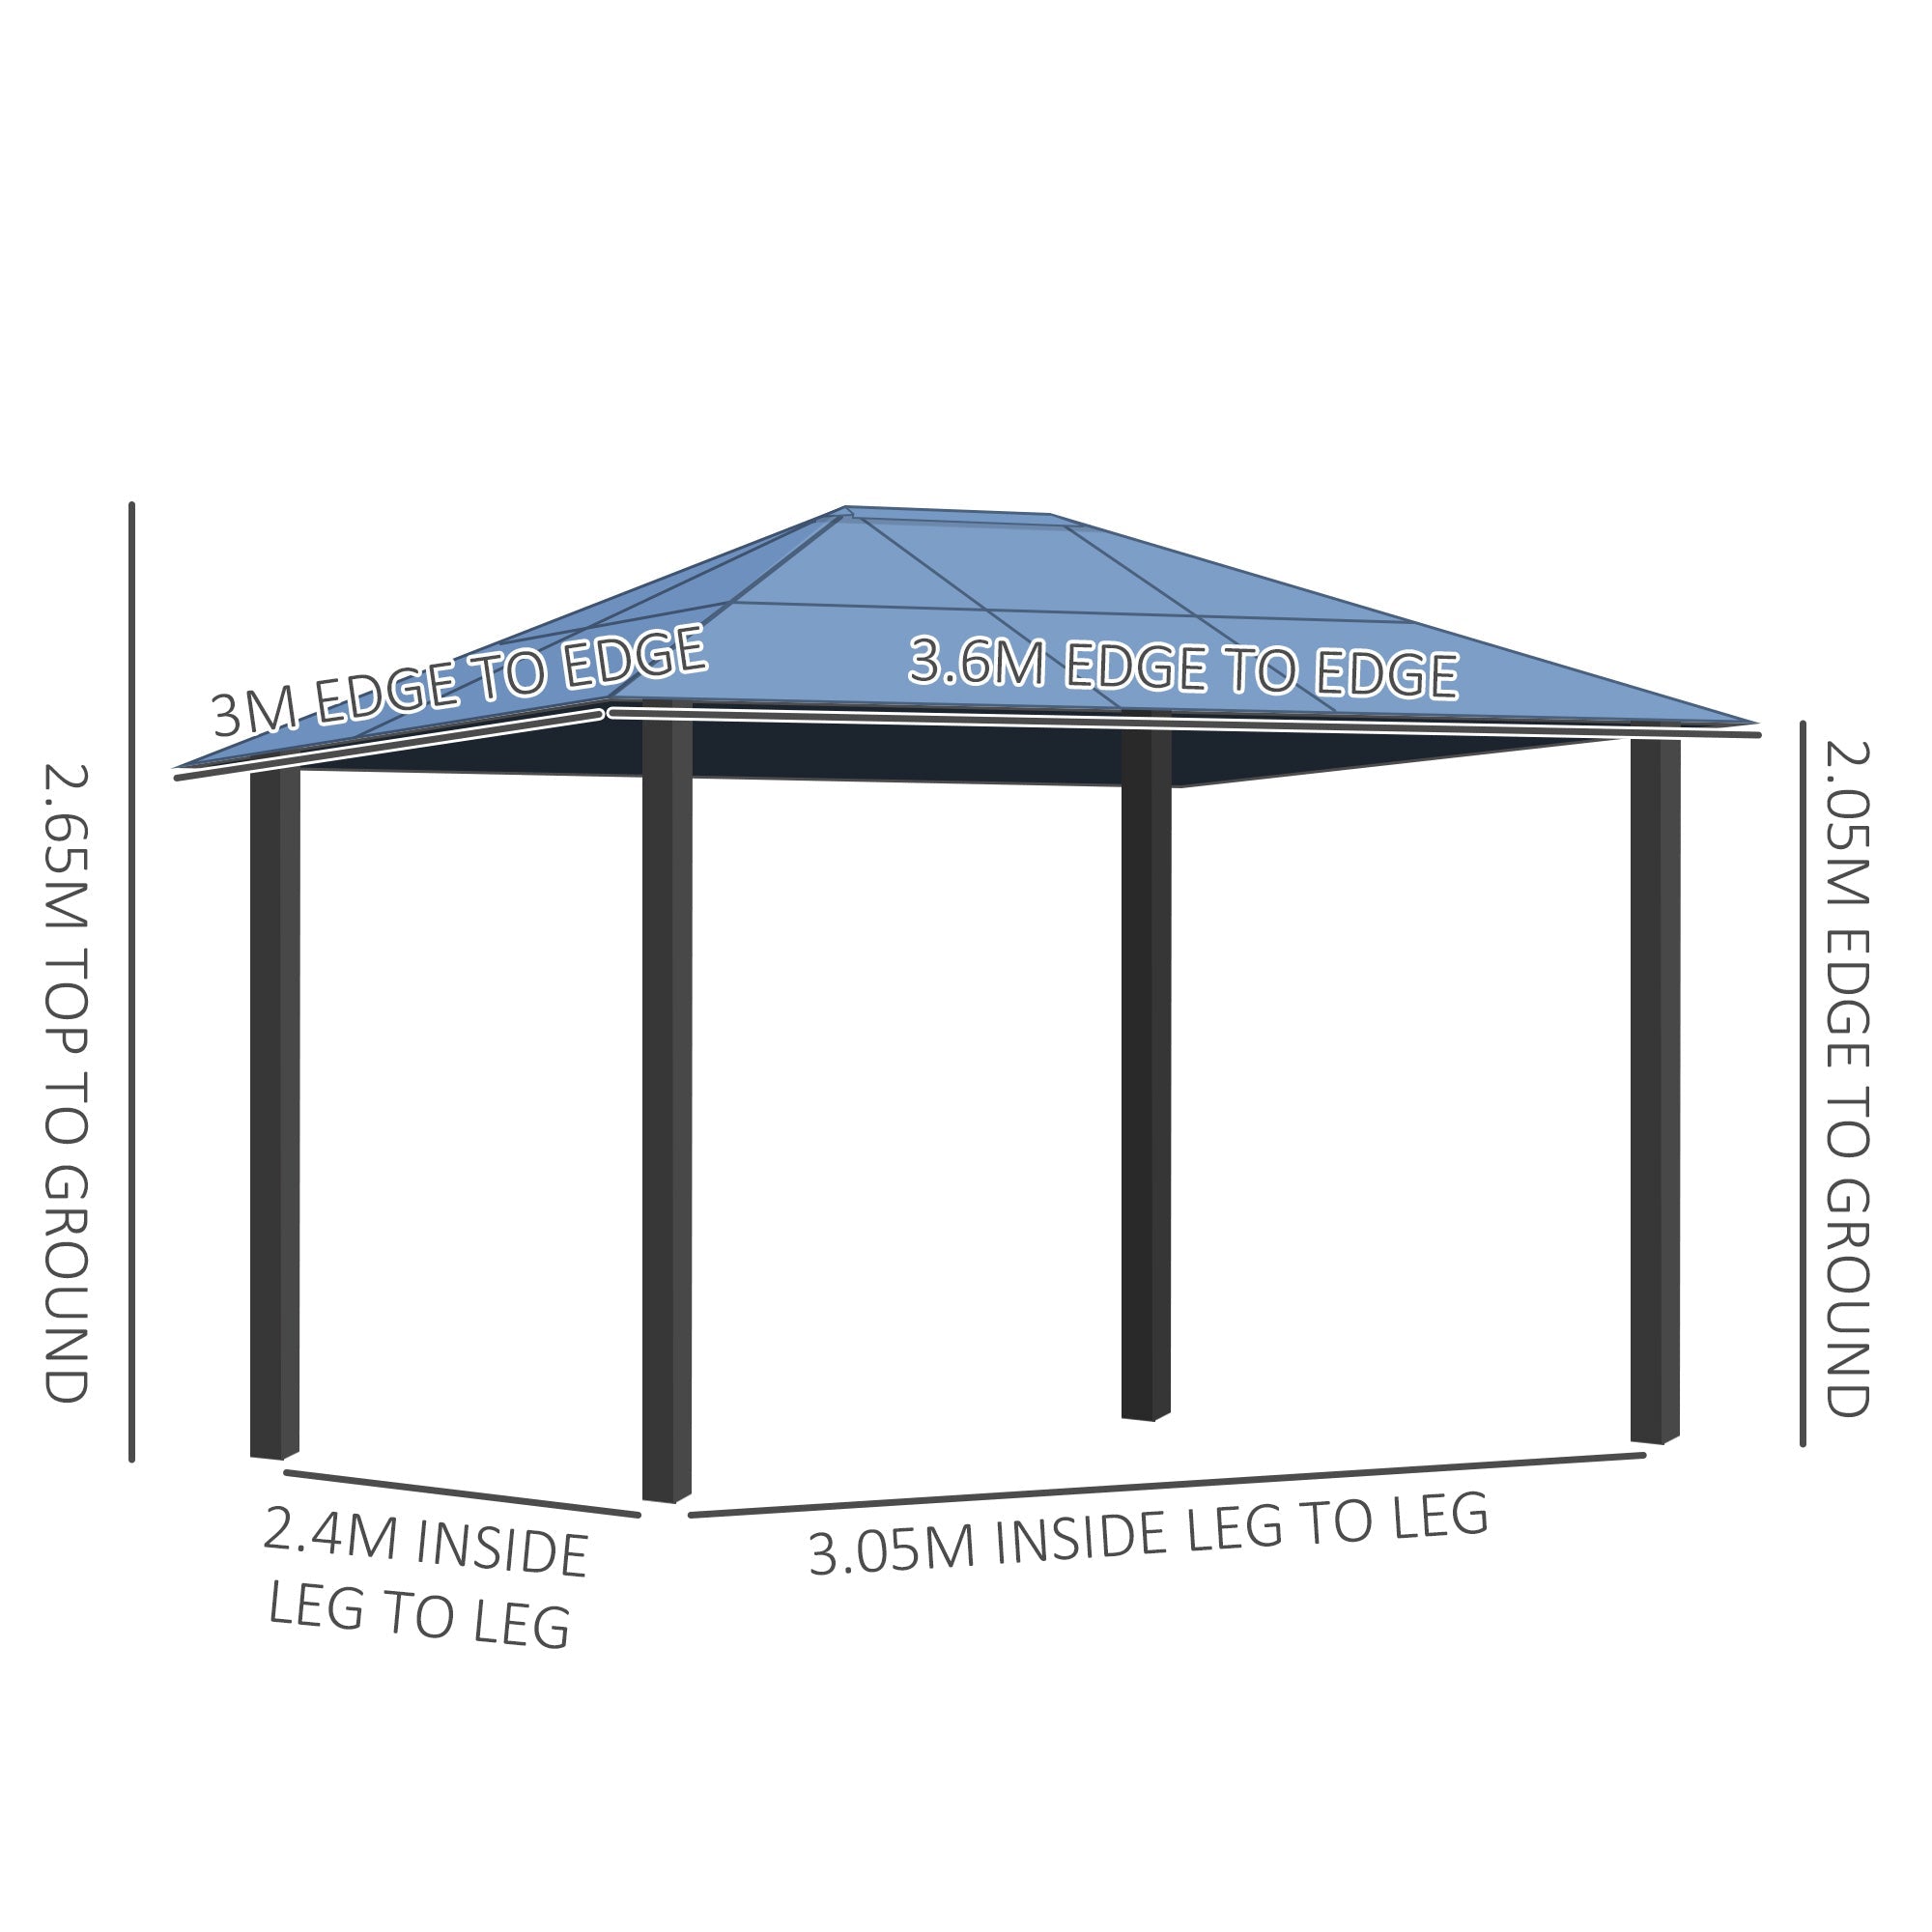 3.6 x 3(m) Polycarbonate Hardtop Gazebo with LED Solar Light and Aluminium Frame, Garden Pavilion with Mosquito Netting and Curtains-2